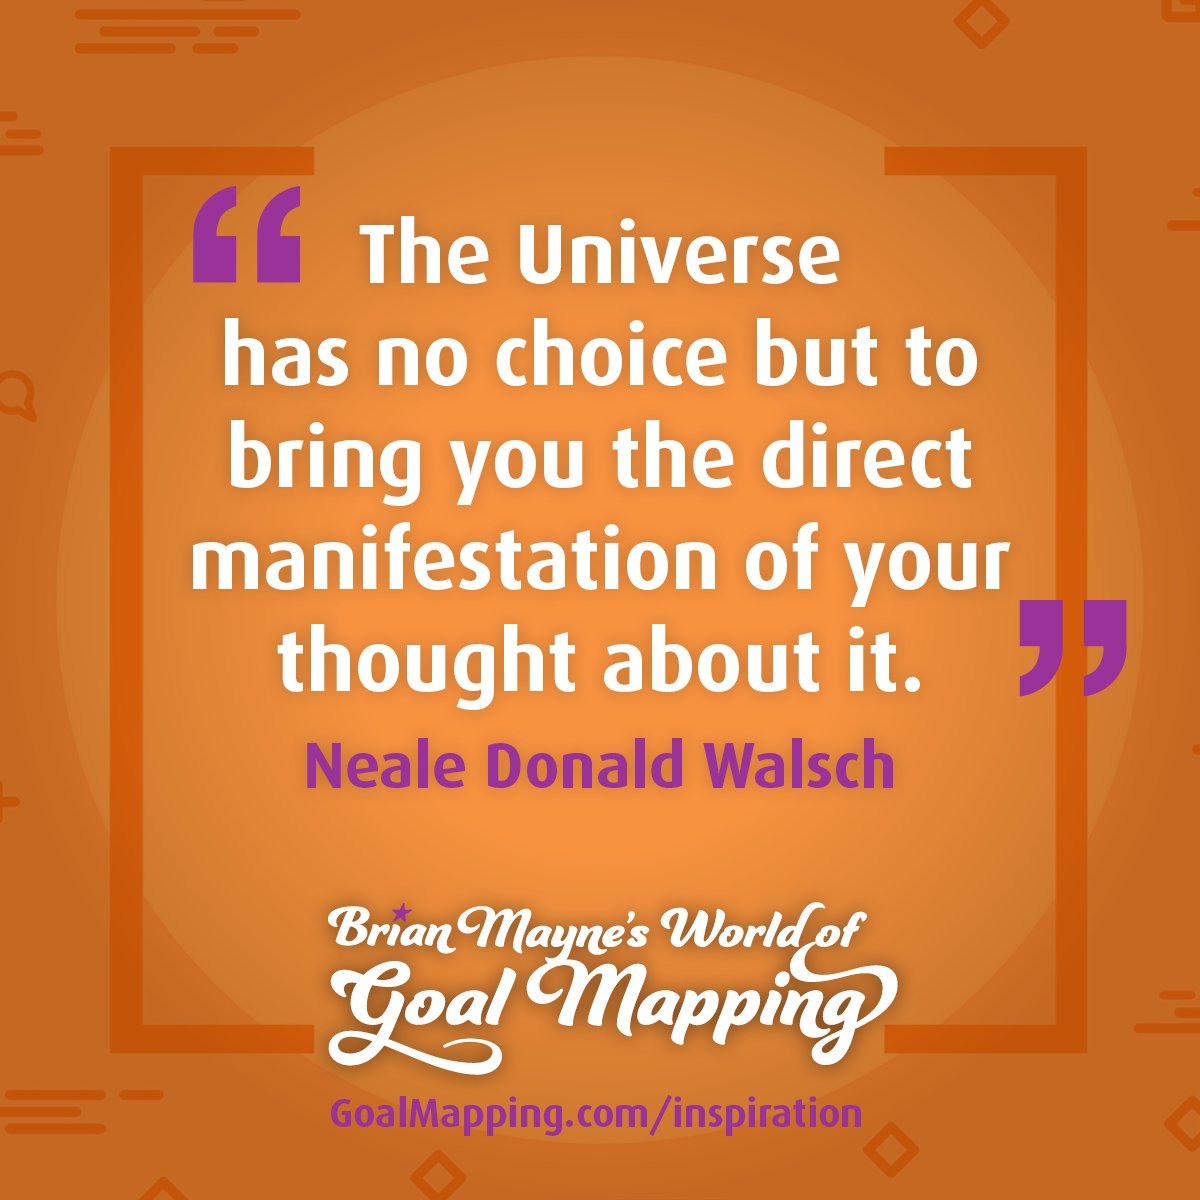 "The Universe has no choice but to bring you the direct manifestation of your thought about it." Neale Donald Walsch